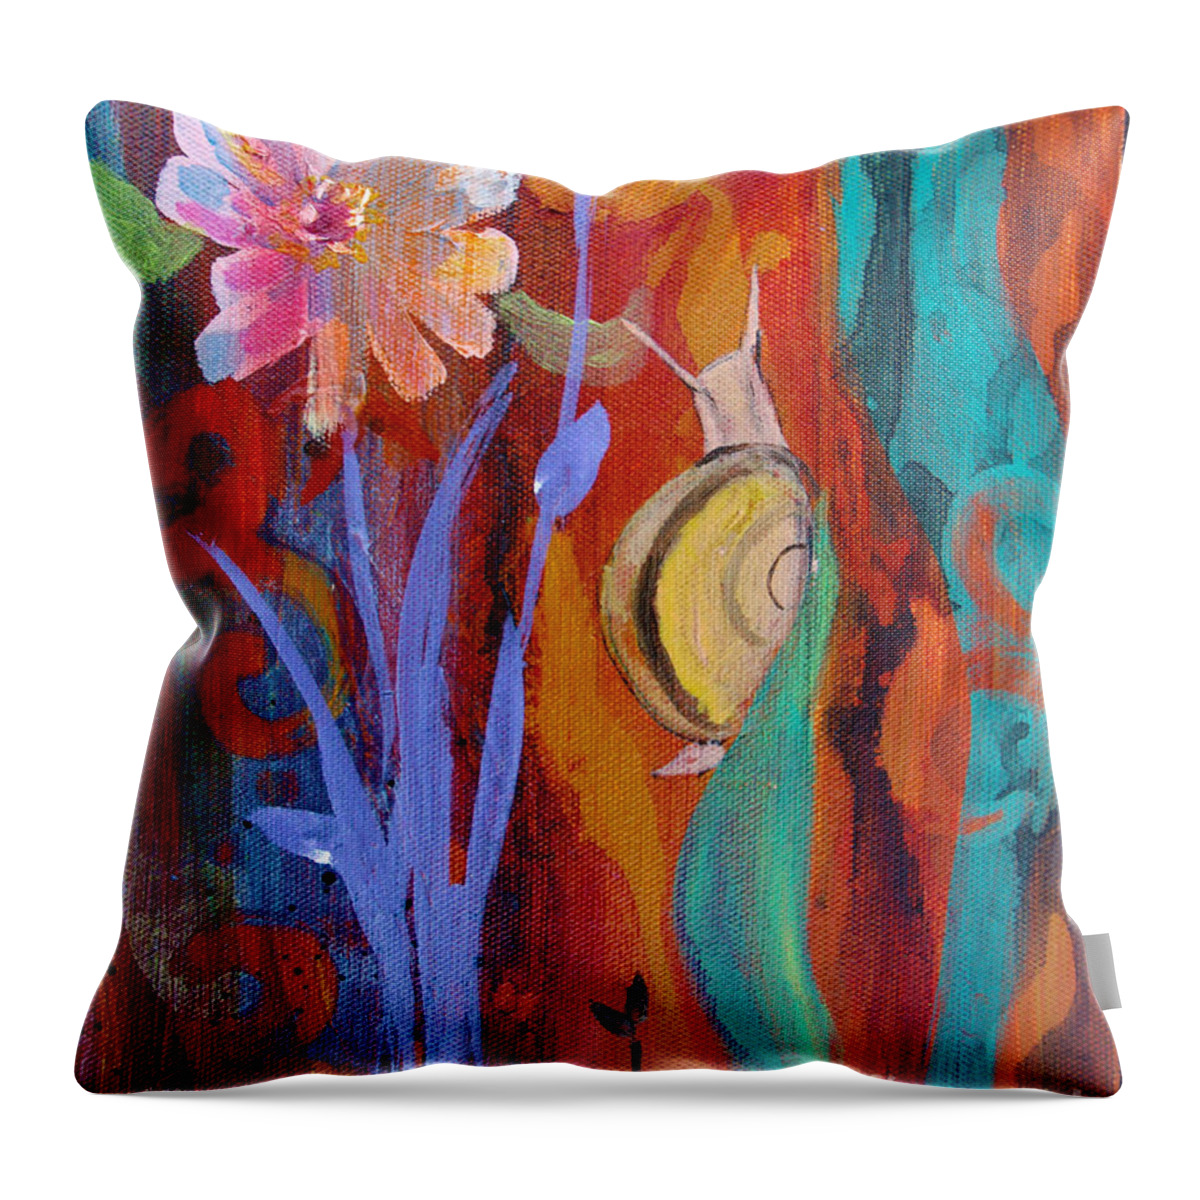 Snail Throw Pillow featuring the painting Time Traveler by Robin Pedrero